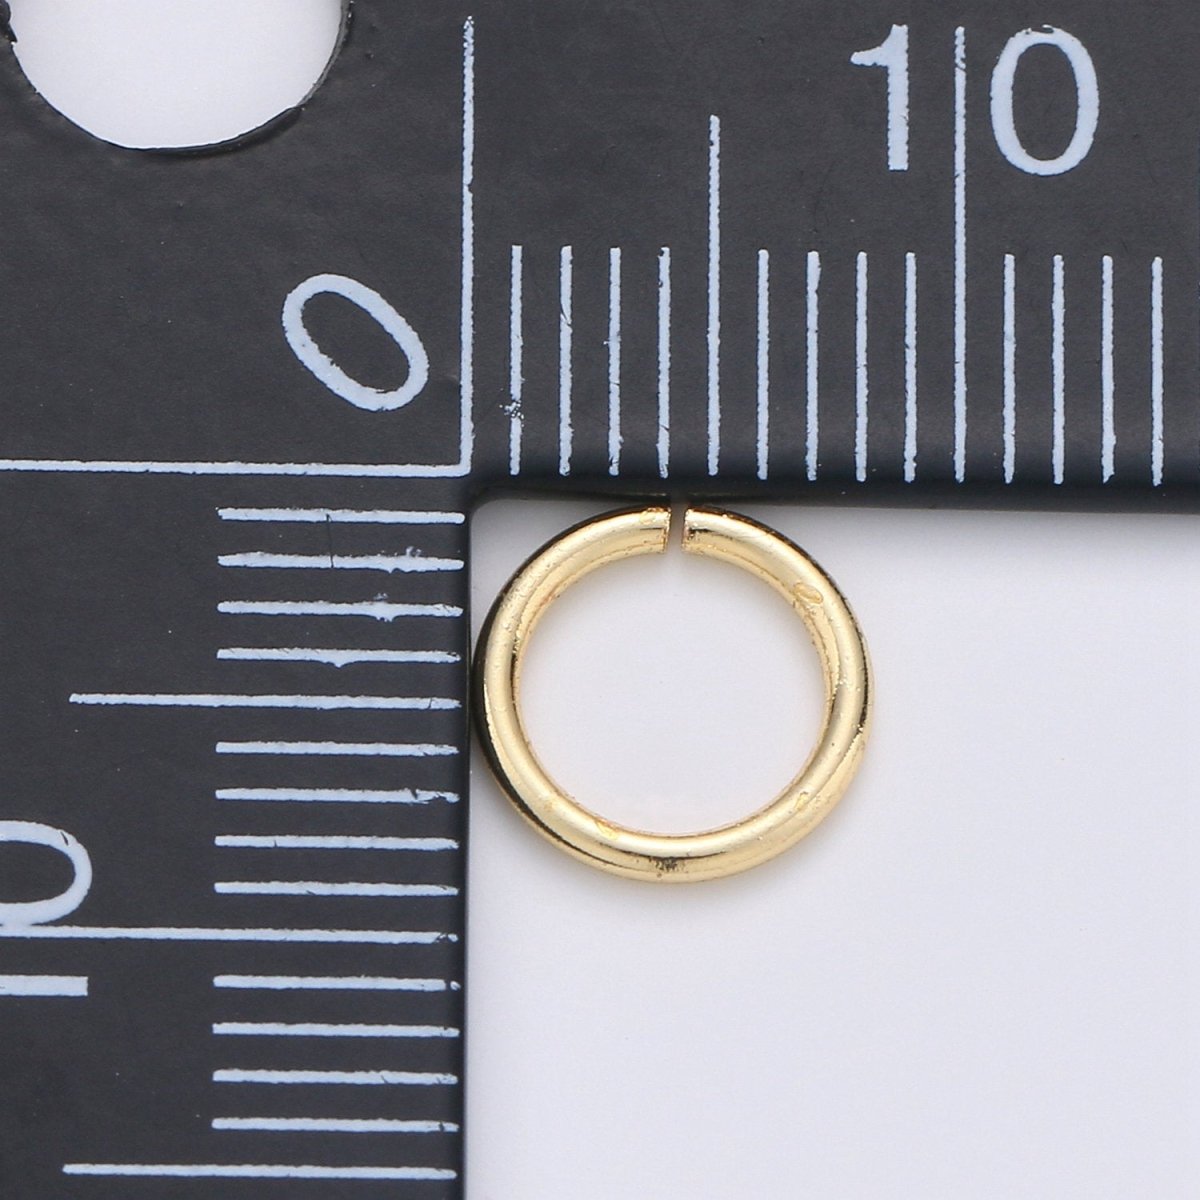 Open Jump Ring Real Gold Plated Jump Ring 5mm 6mm 7mm 8mm 10mm with 18 gauge / 1mm thickness for Jewelry Supply Component 10gram O-024 O-032 ~ O-037 - DLUXCA